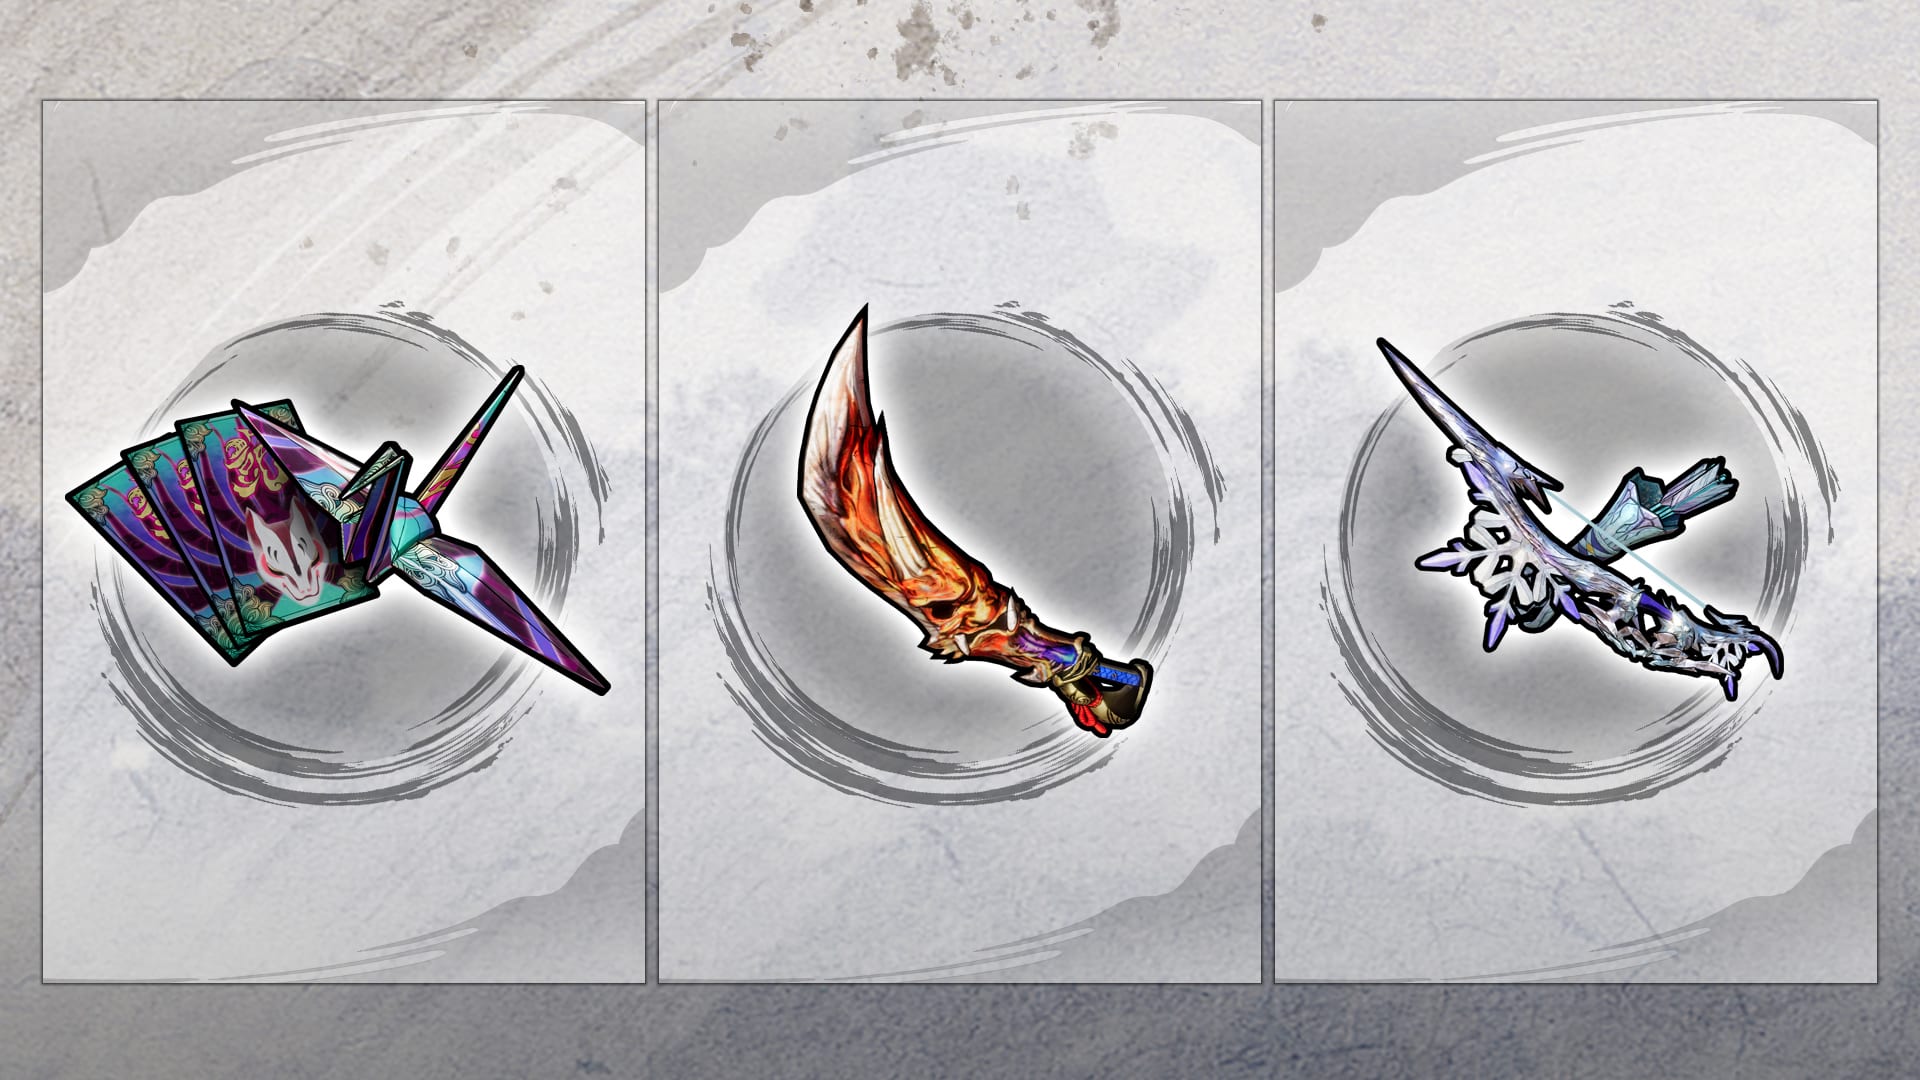 Additional Weapon set 1